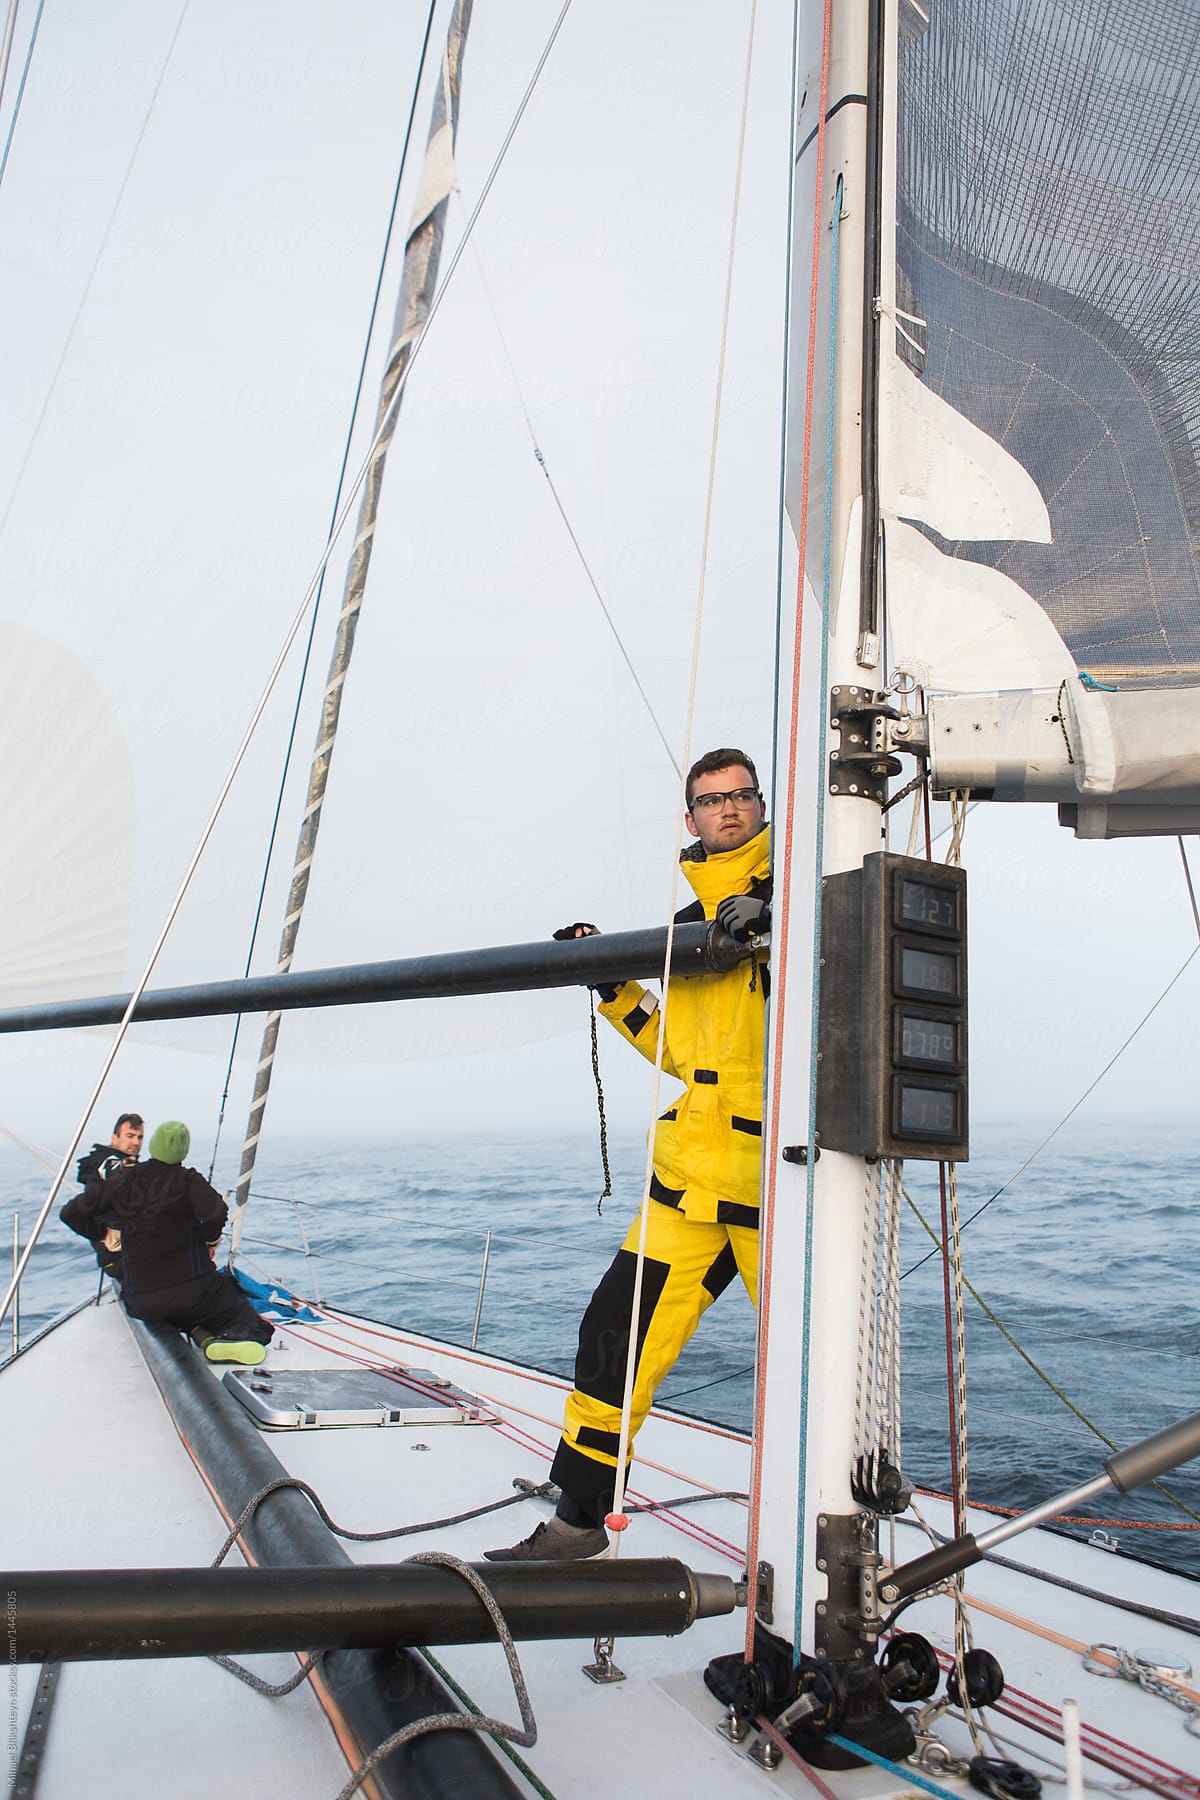 Crew on a racing sailboat or yacht